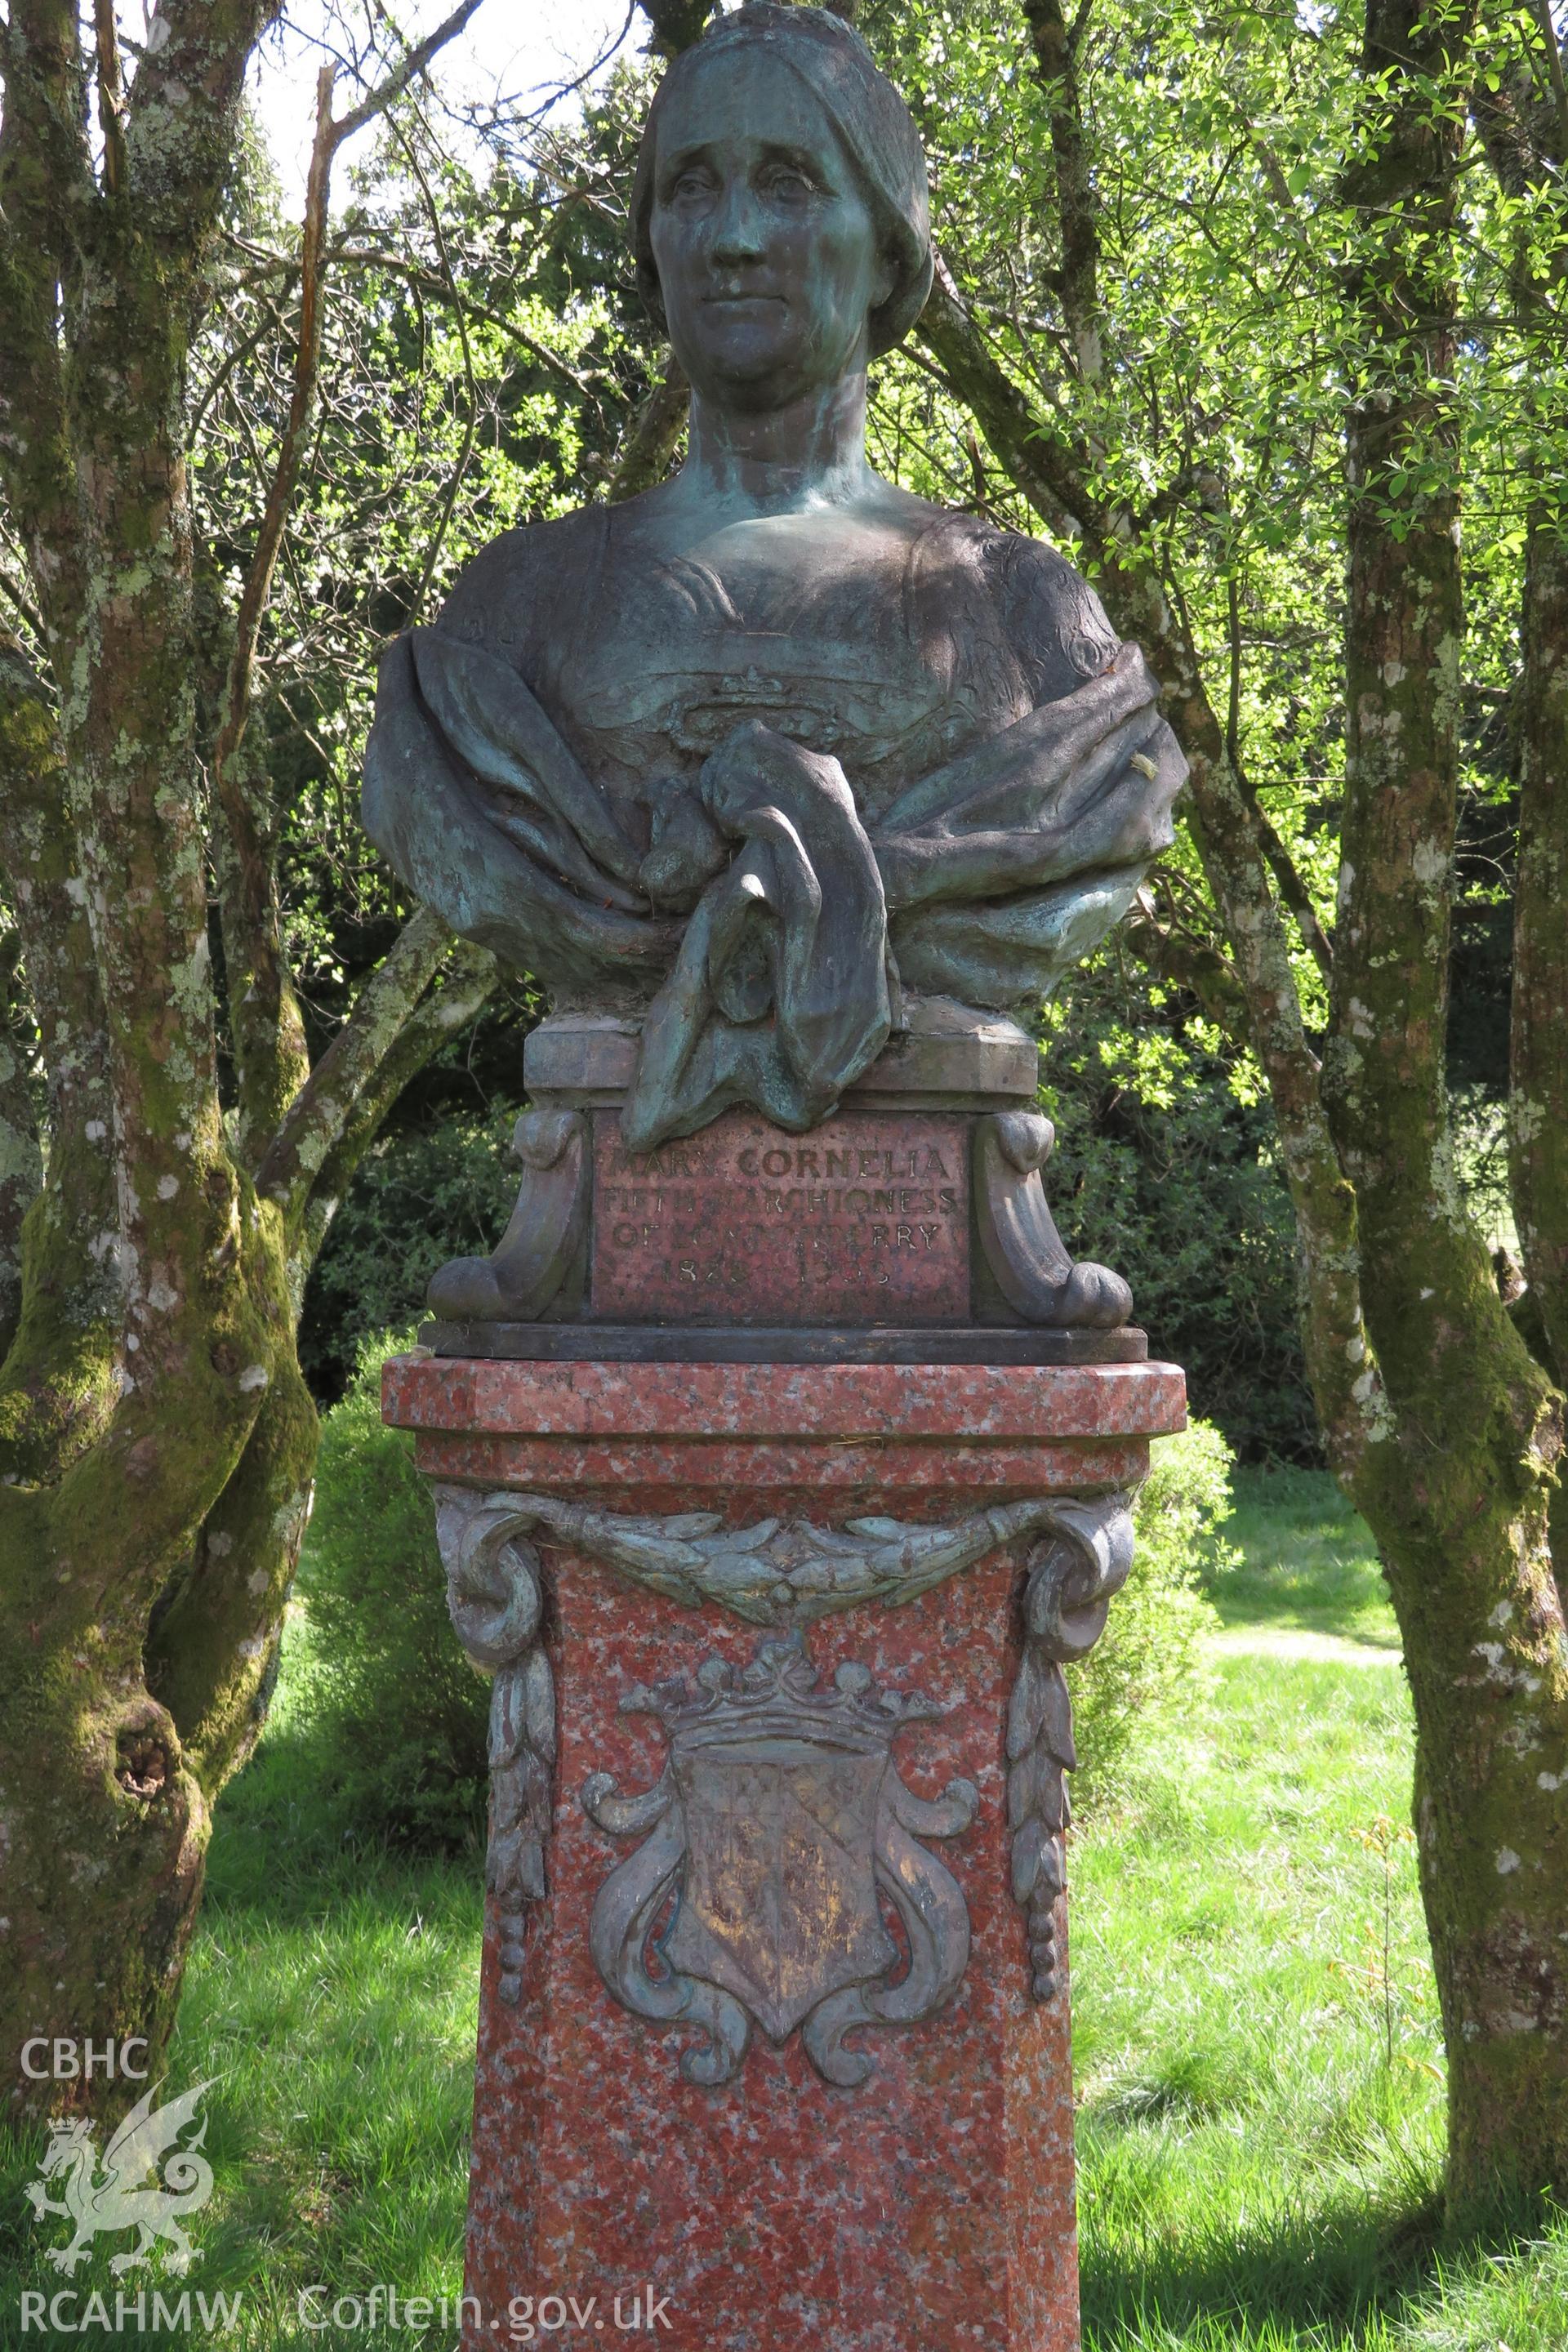 View of the bust of Mary Cornelia Vane-Tempest from the front, showing inscription and coat of arms, April 2022.